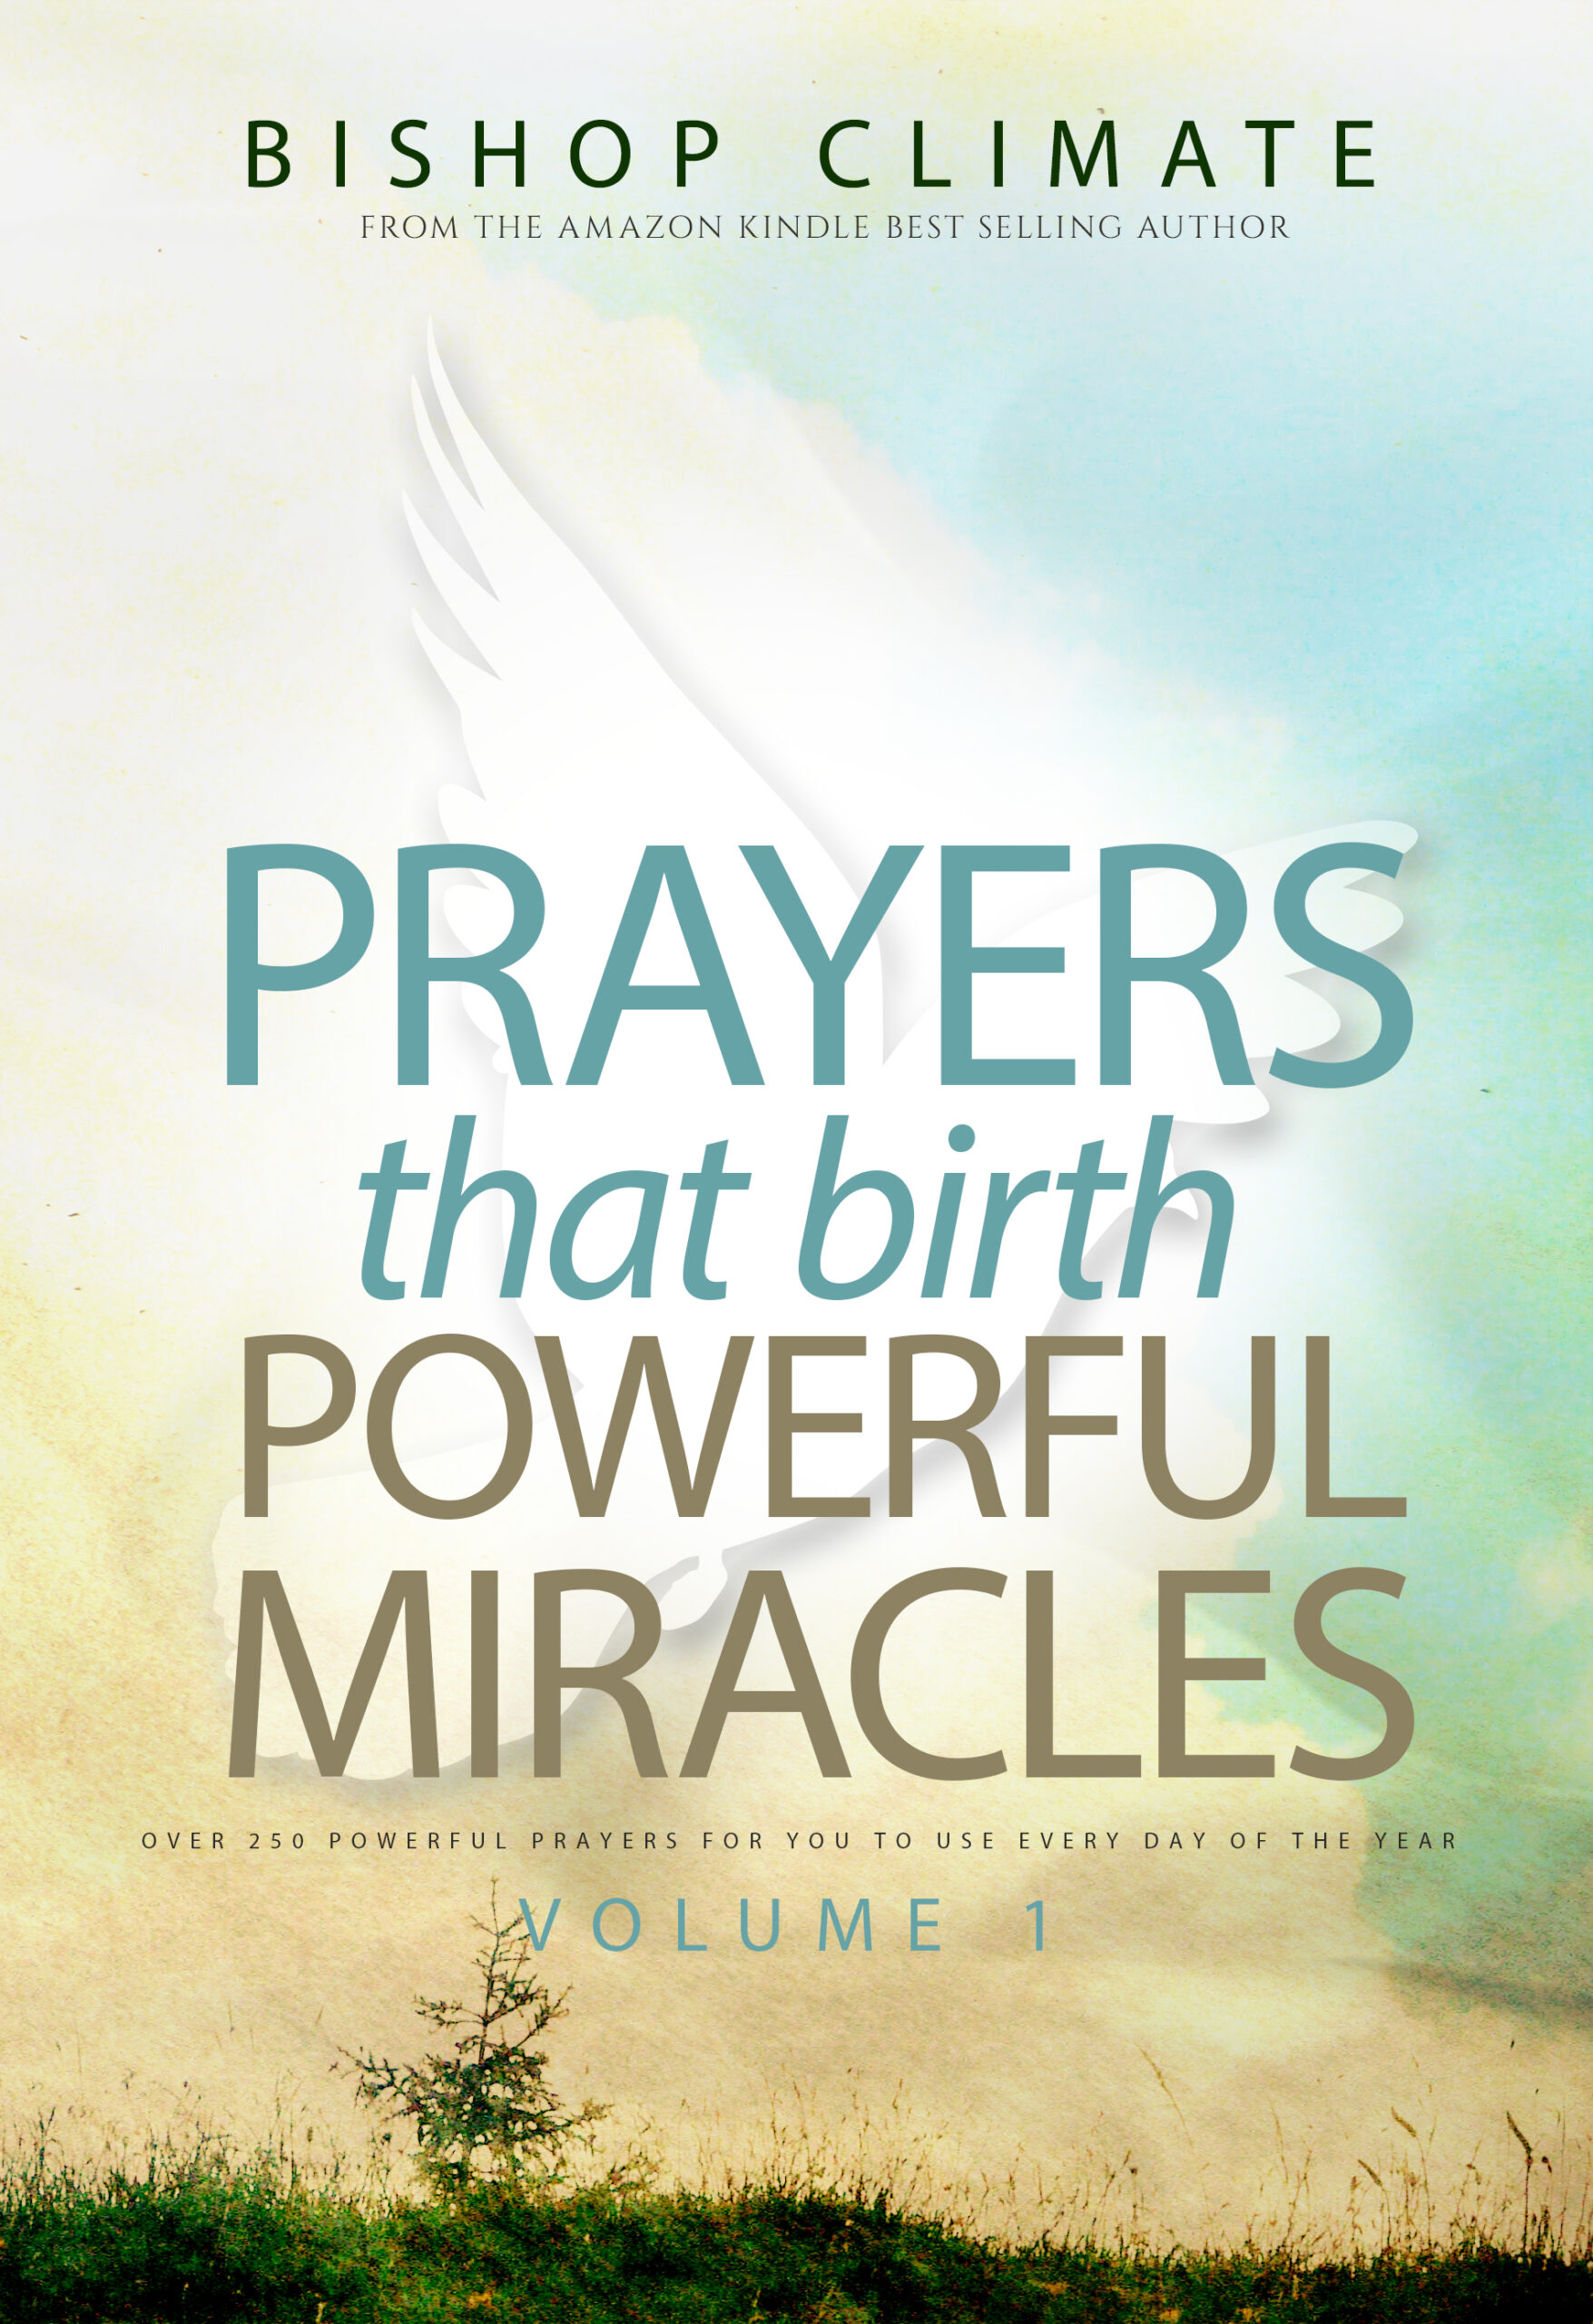 Prayers that birth powerful miracles vol 1 scaled